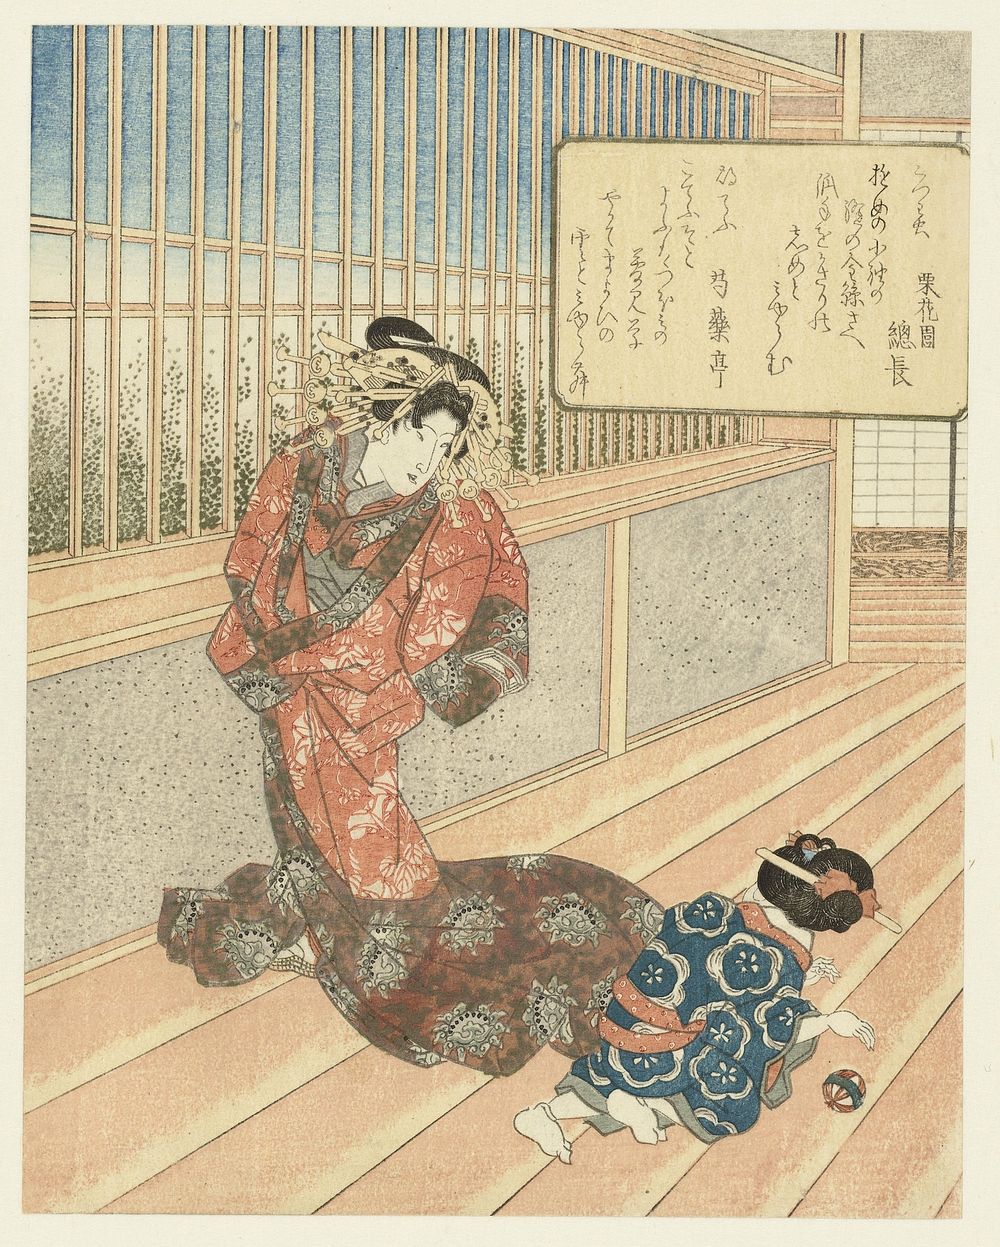 A Courtesan Watches a Kamuro Playing with a Ball (c. 1825 - c. 1830) by anonymous, Rikkaen Fusanaga and Shakuyakutei